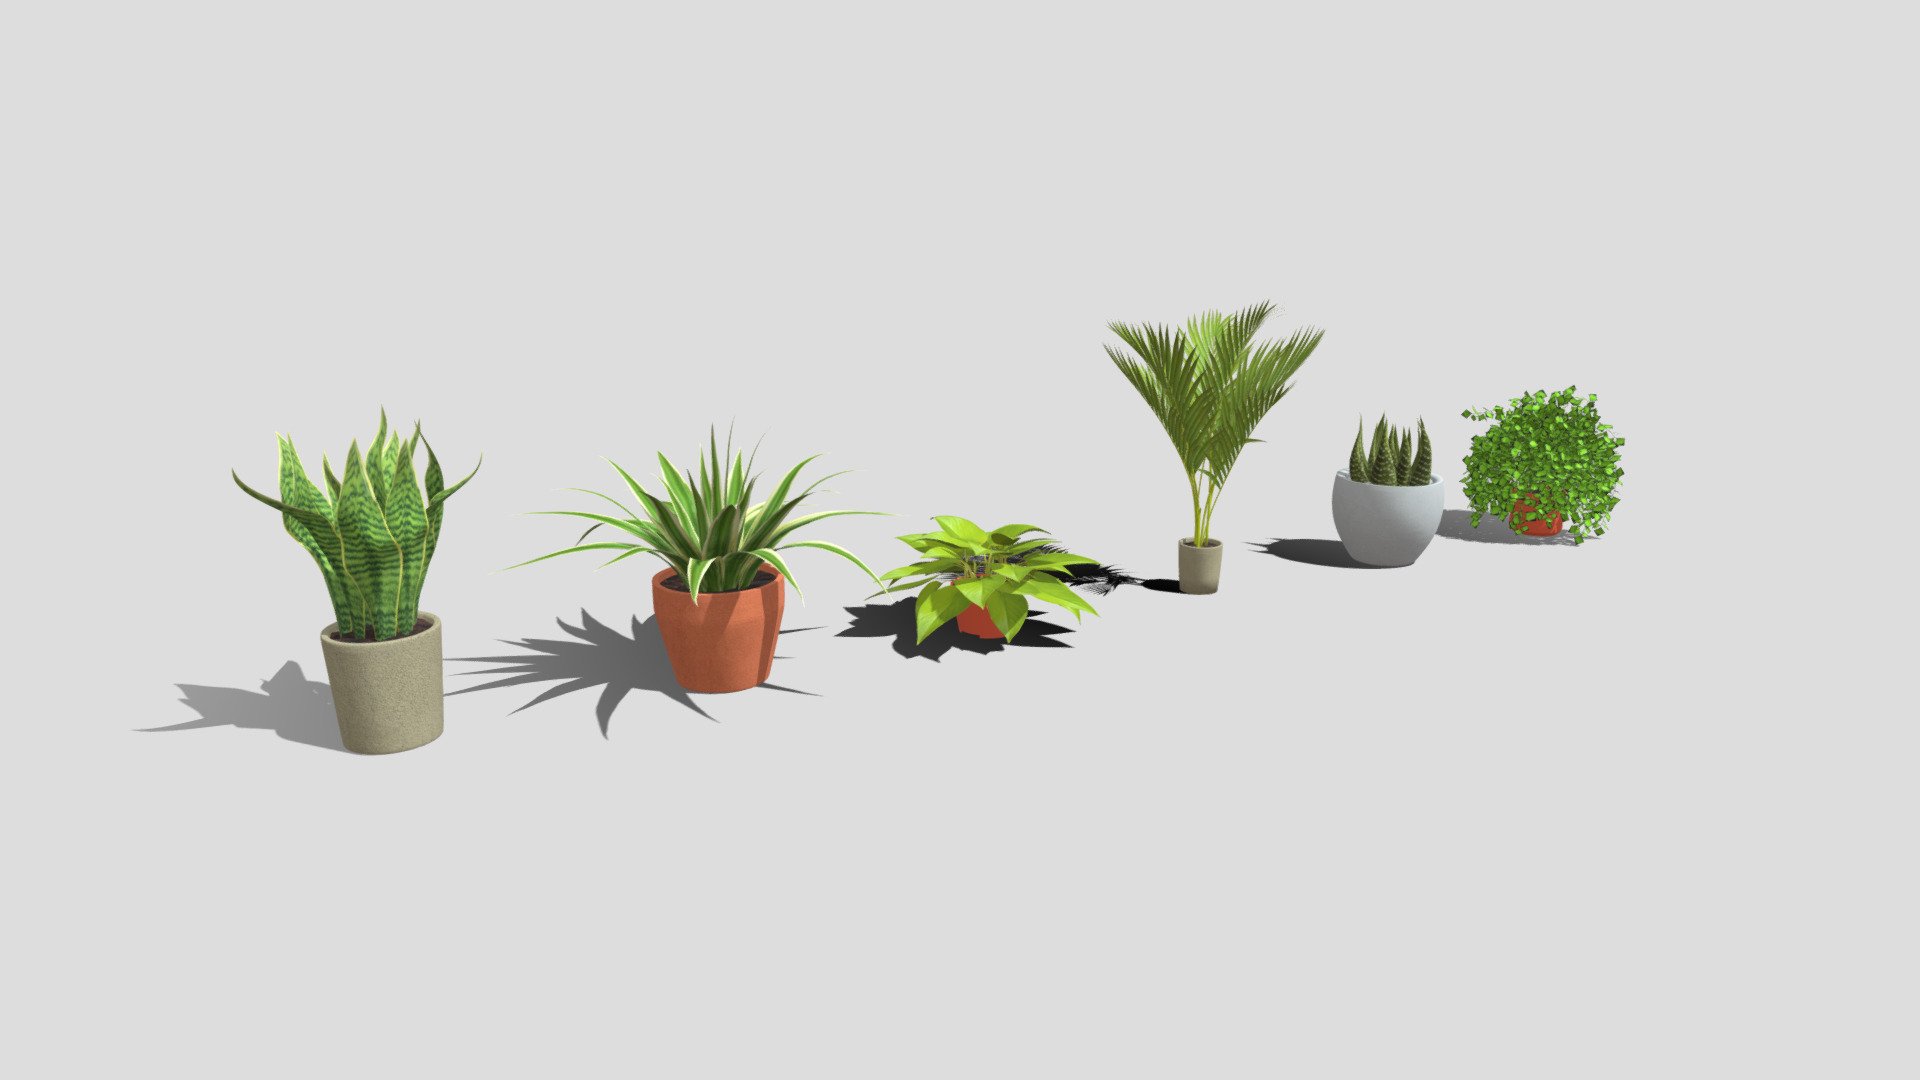 3D models of different types of plants to use as home or office decor. 

Package includes (individual models as well in links): 


Snake plant
Majesty palm plant
Neon photos
Spider plant
Haworthia plant 
Maidenhair fern

Models available in FBX &amp; OBJ - Low poly plants pack - Buy Royalty Free 3D model by assetfactory 3d model